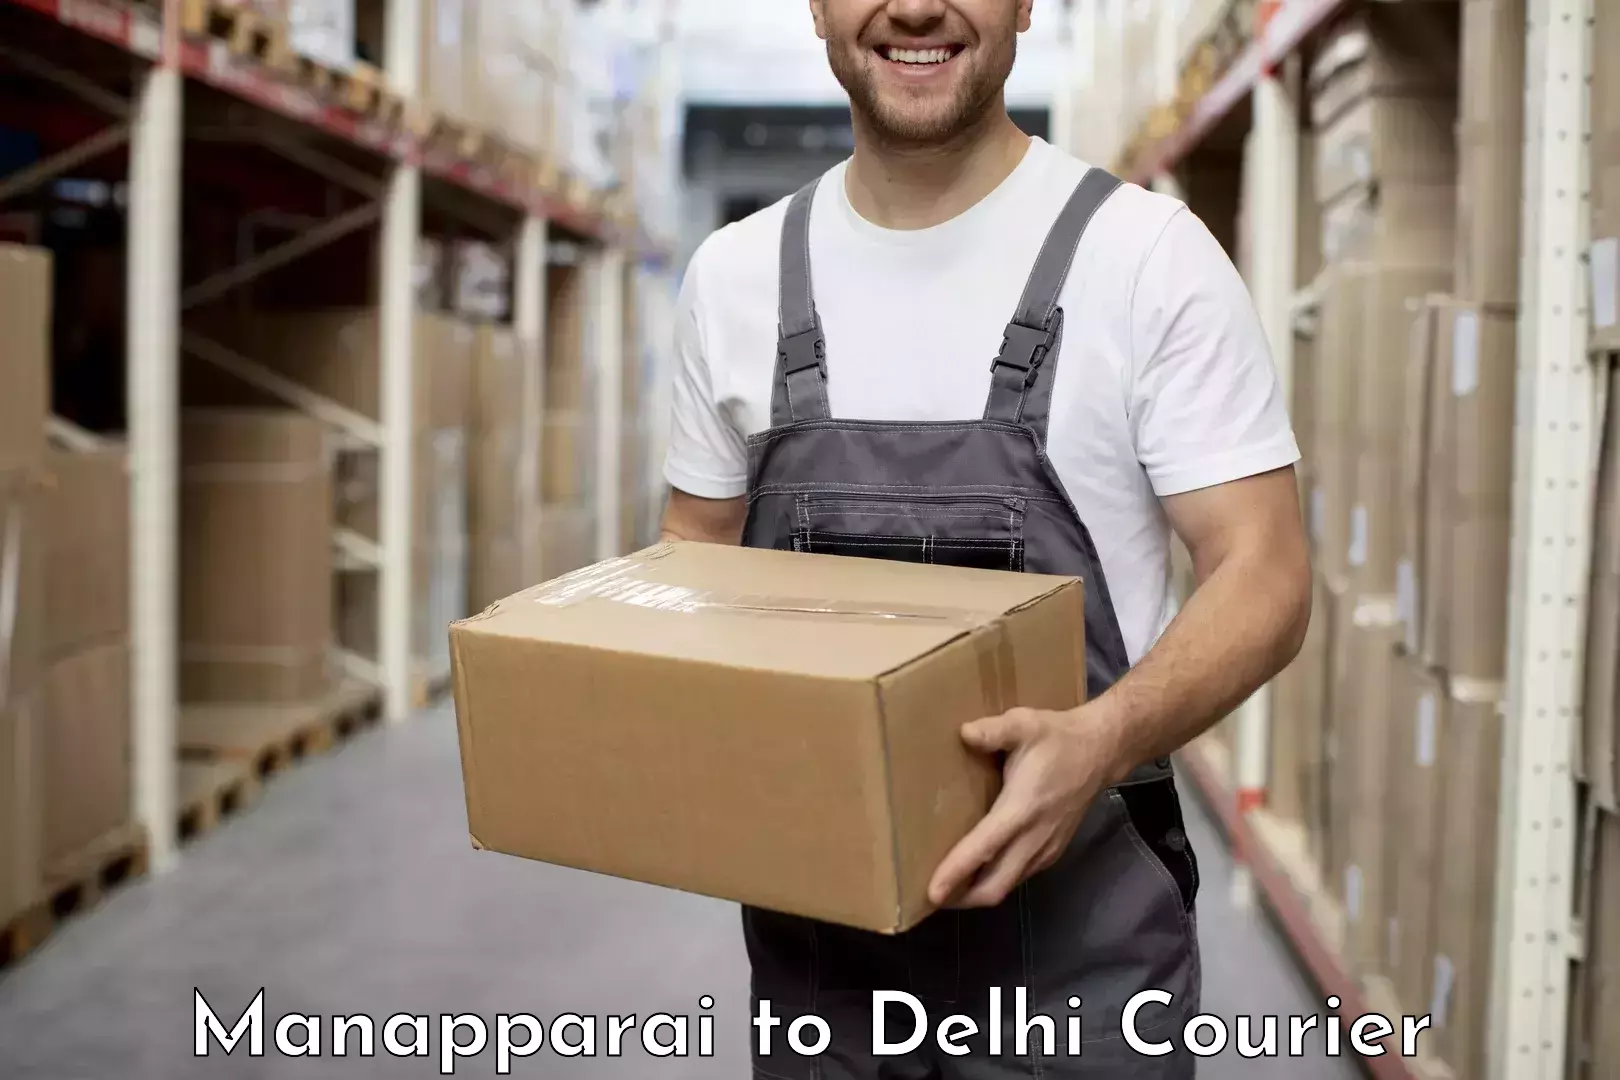 Reliable freight solutions Manapparai to Delhi